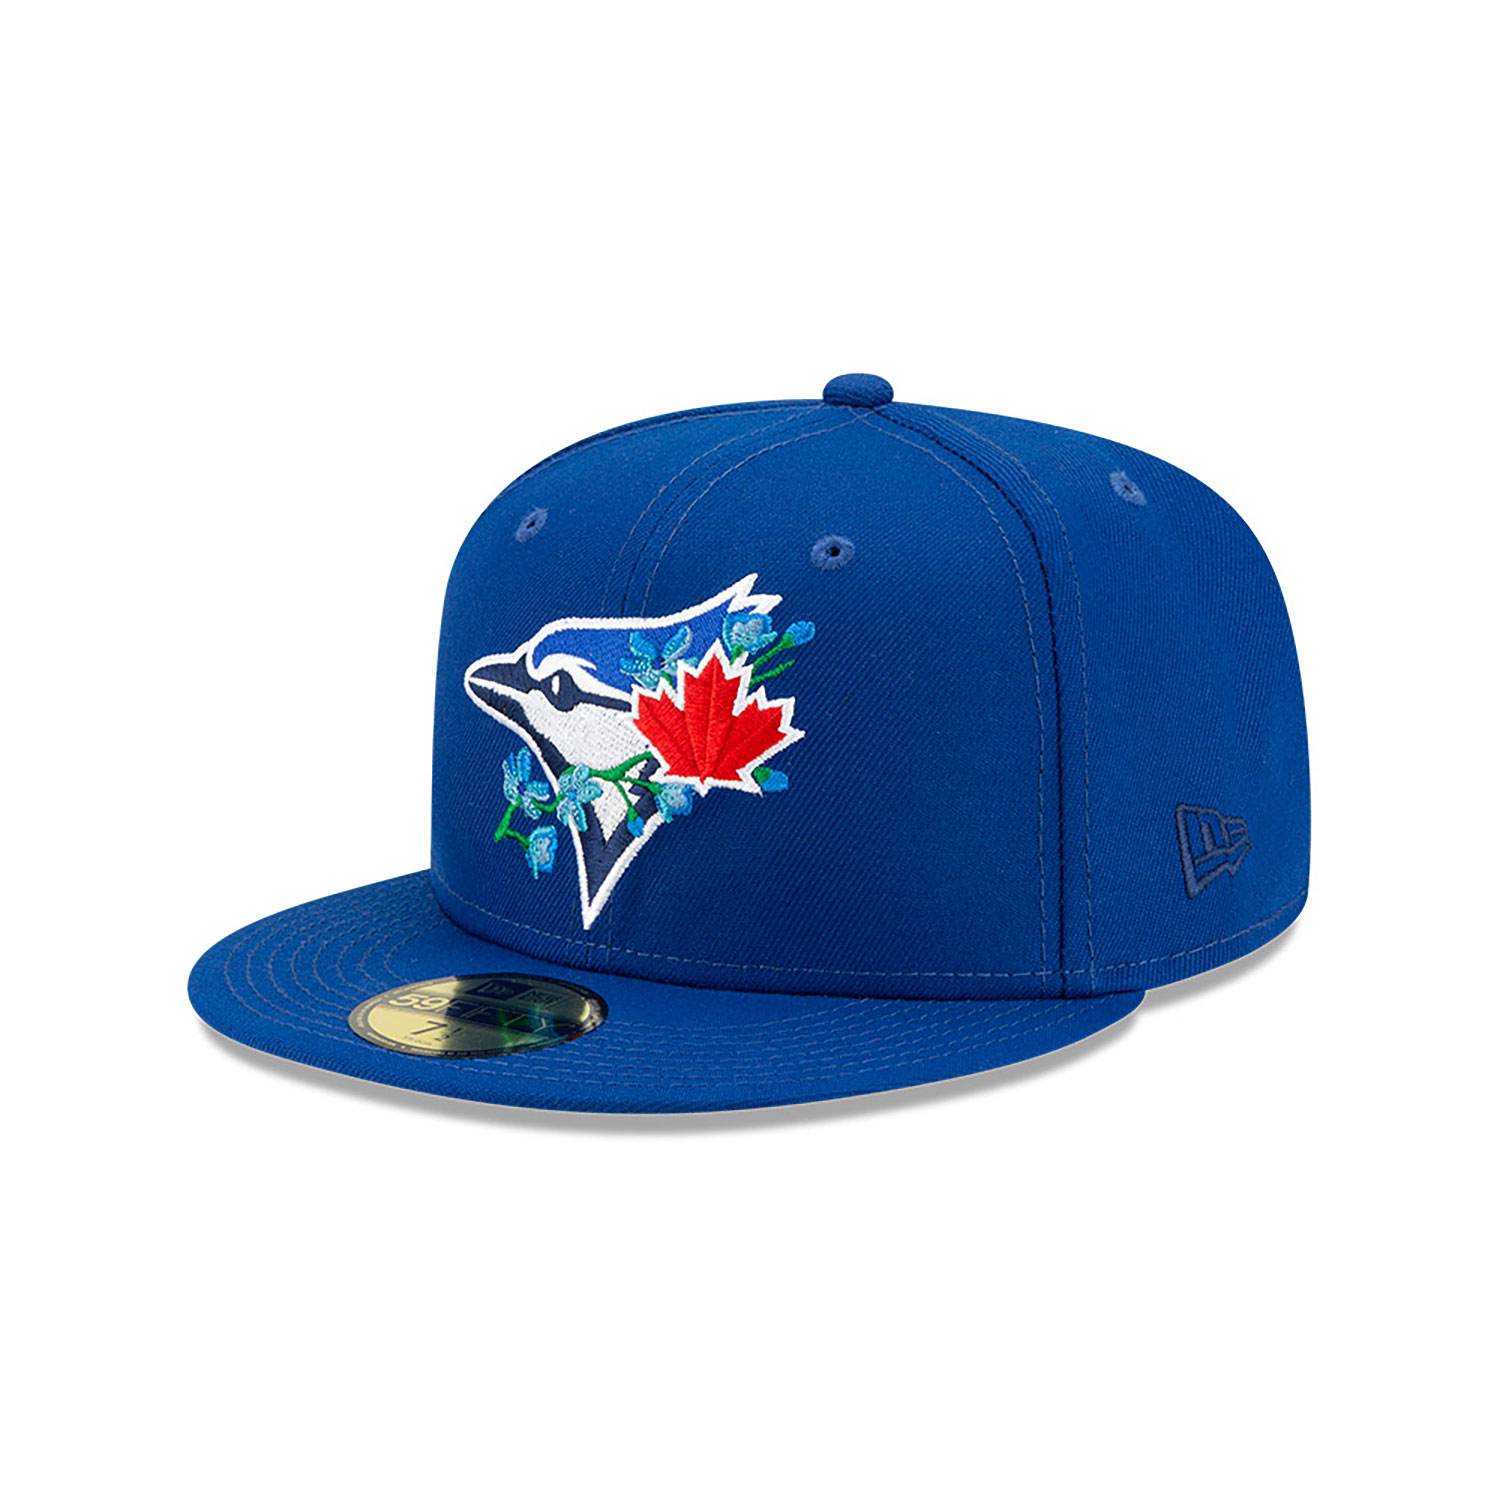 Official New Era Toronto Blue Jays Mlb Side Patch Bloom Bright Royal